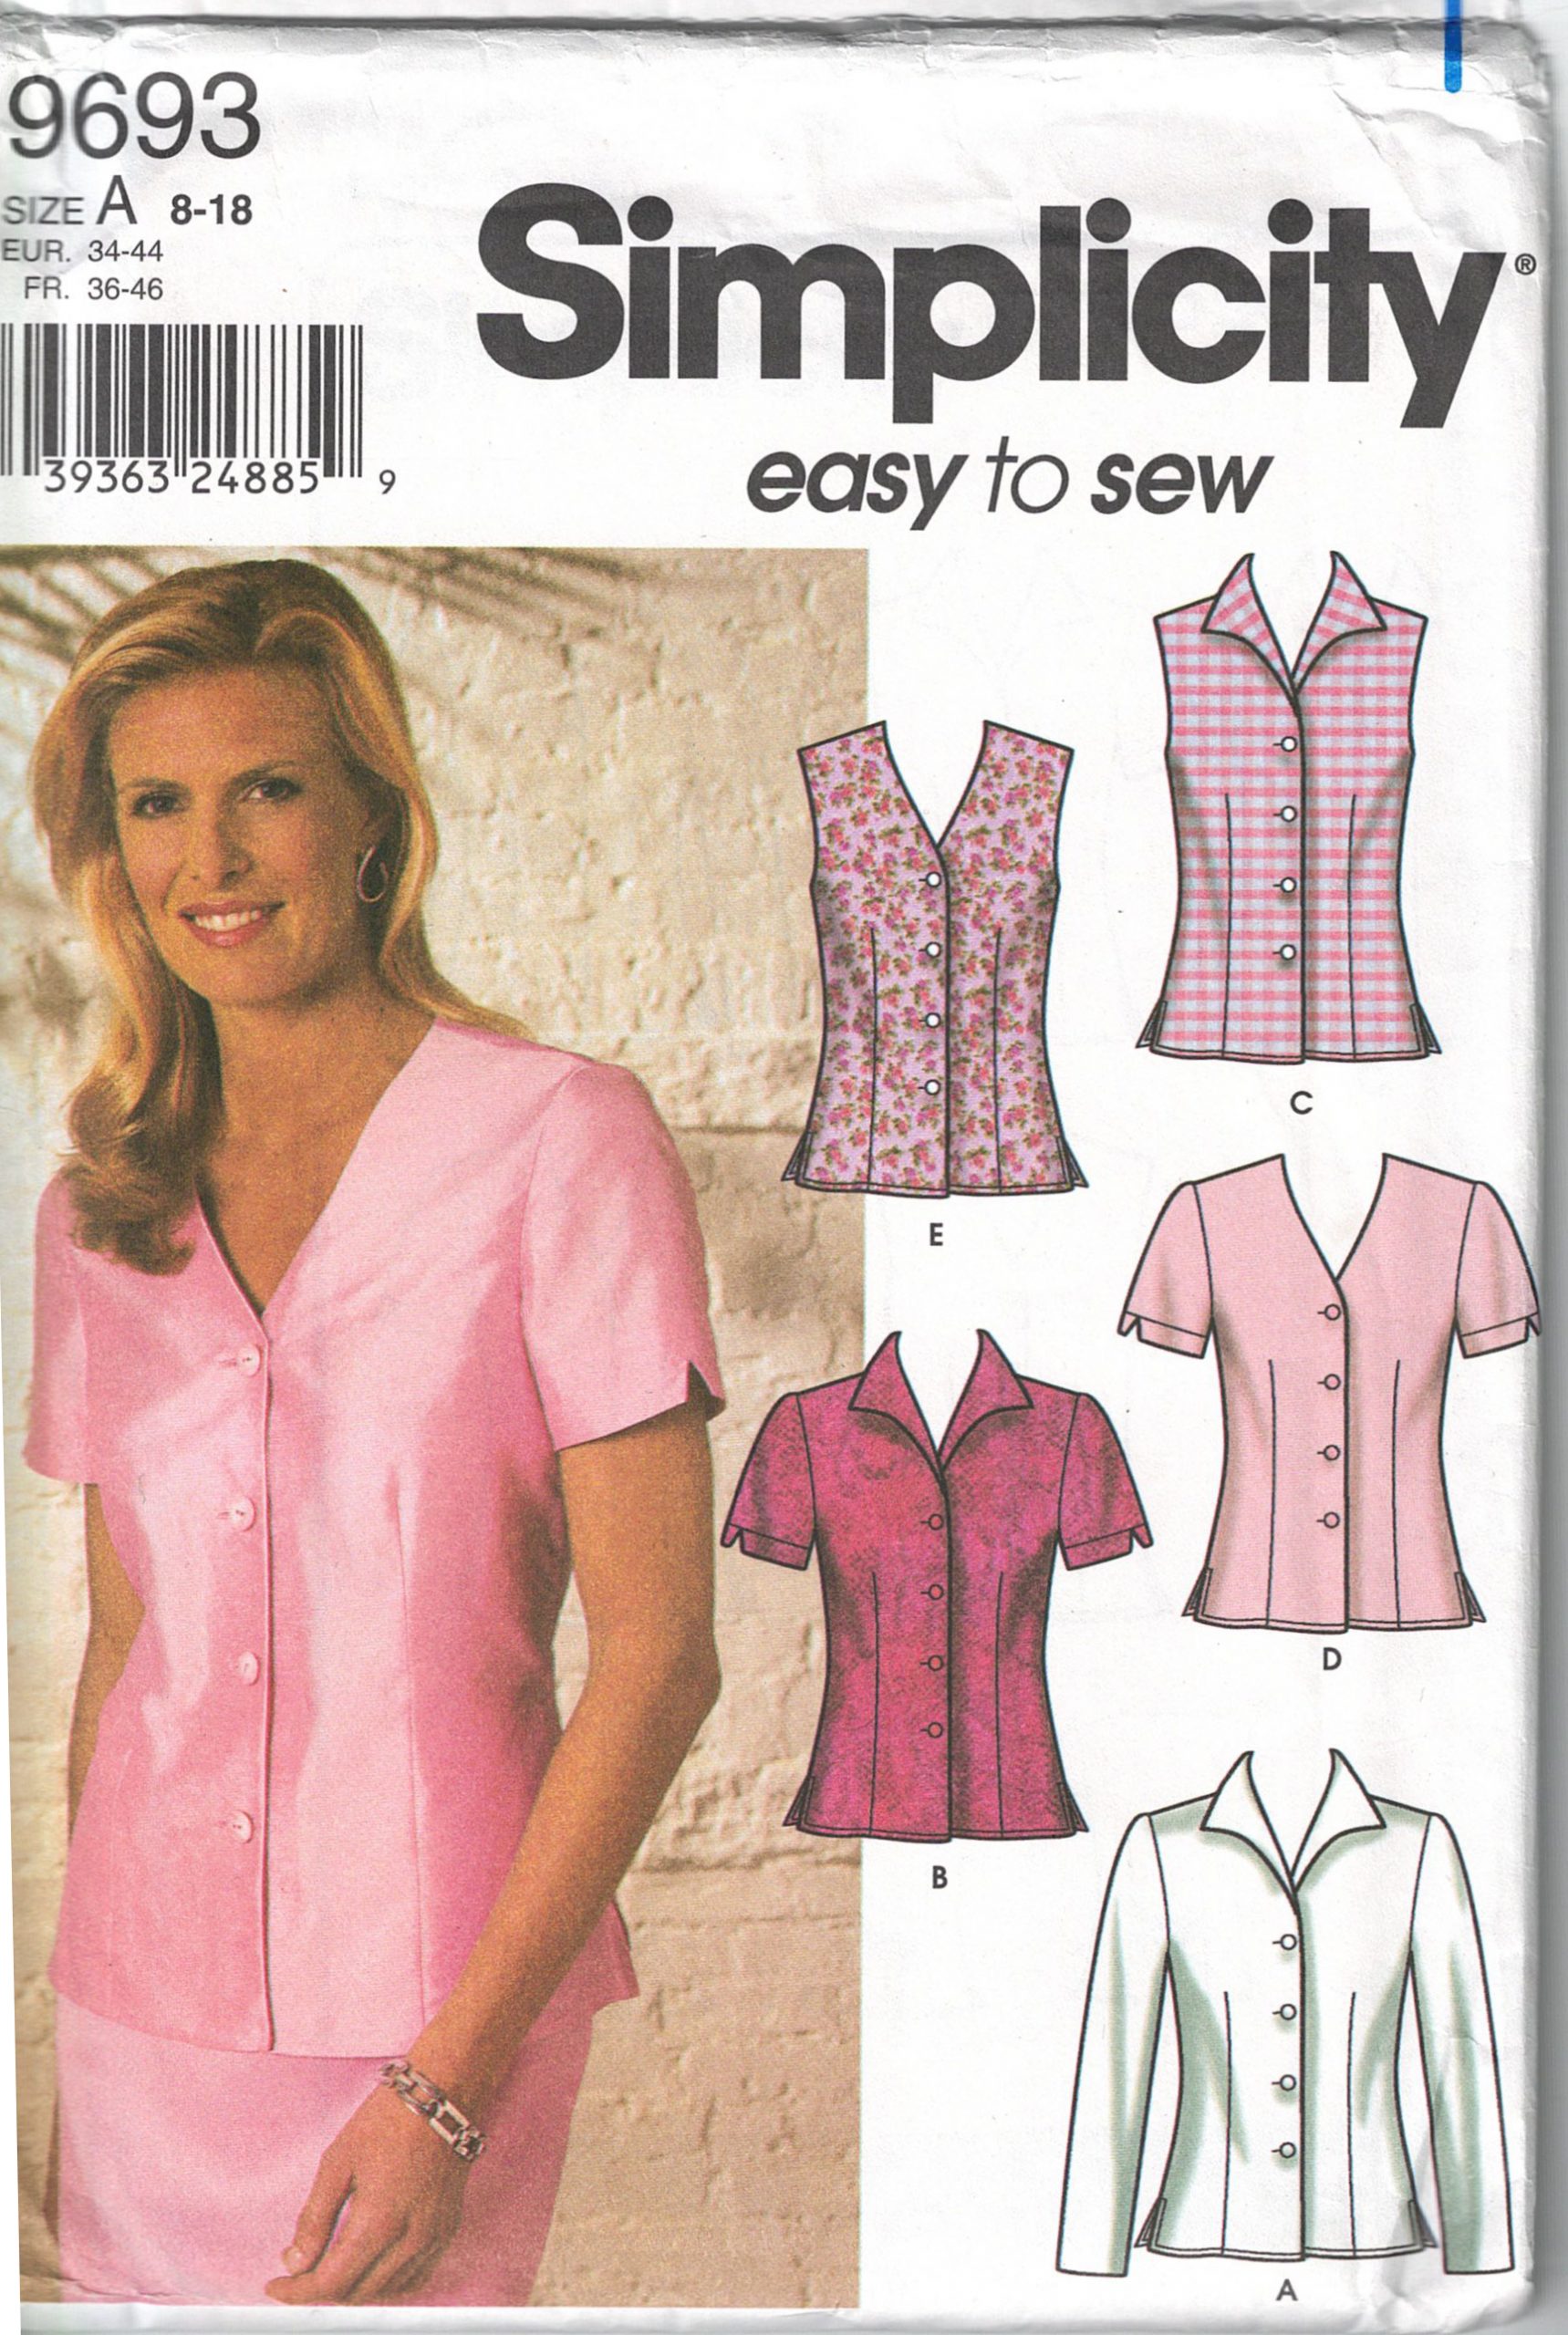 How to Read Commercial Sewing Patterns - Seamingly Badass